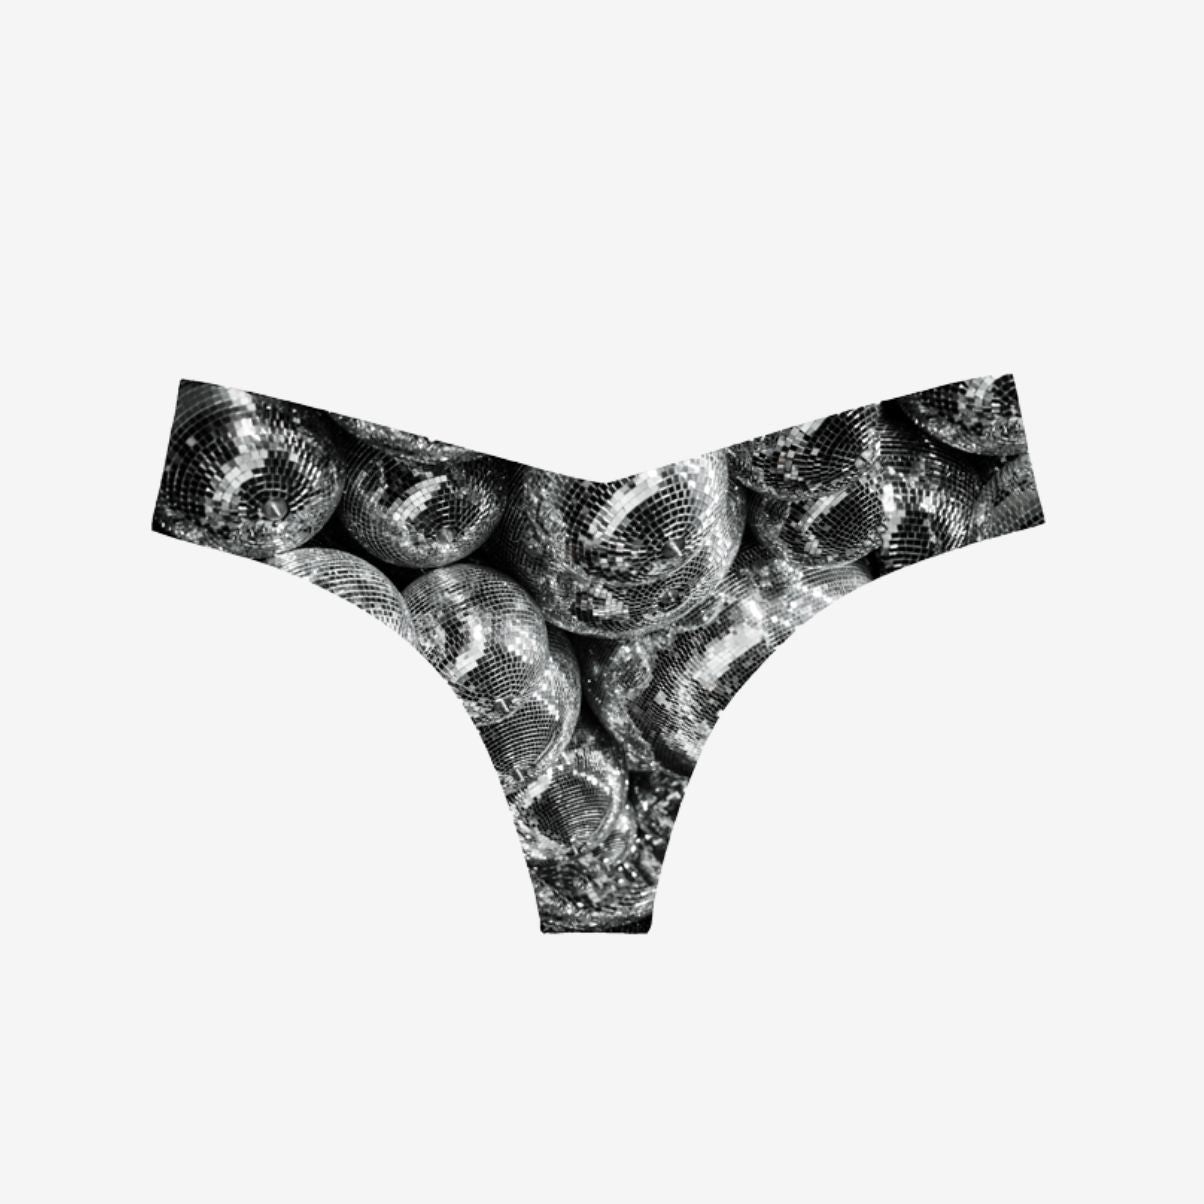 Commando Classic Mid-Rise Thong in Mirrorball CT02-Panties-Commando-Mirrorball-Small/Medium-Anna Bella Fine Lingerie, Reveal Your Most Gorgeous Self!